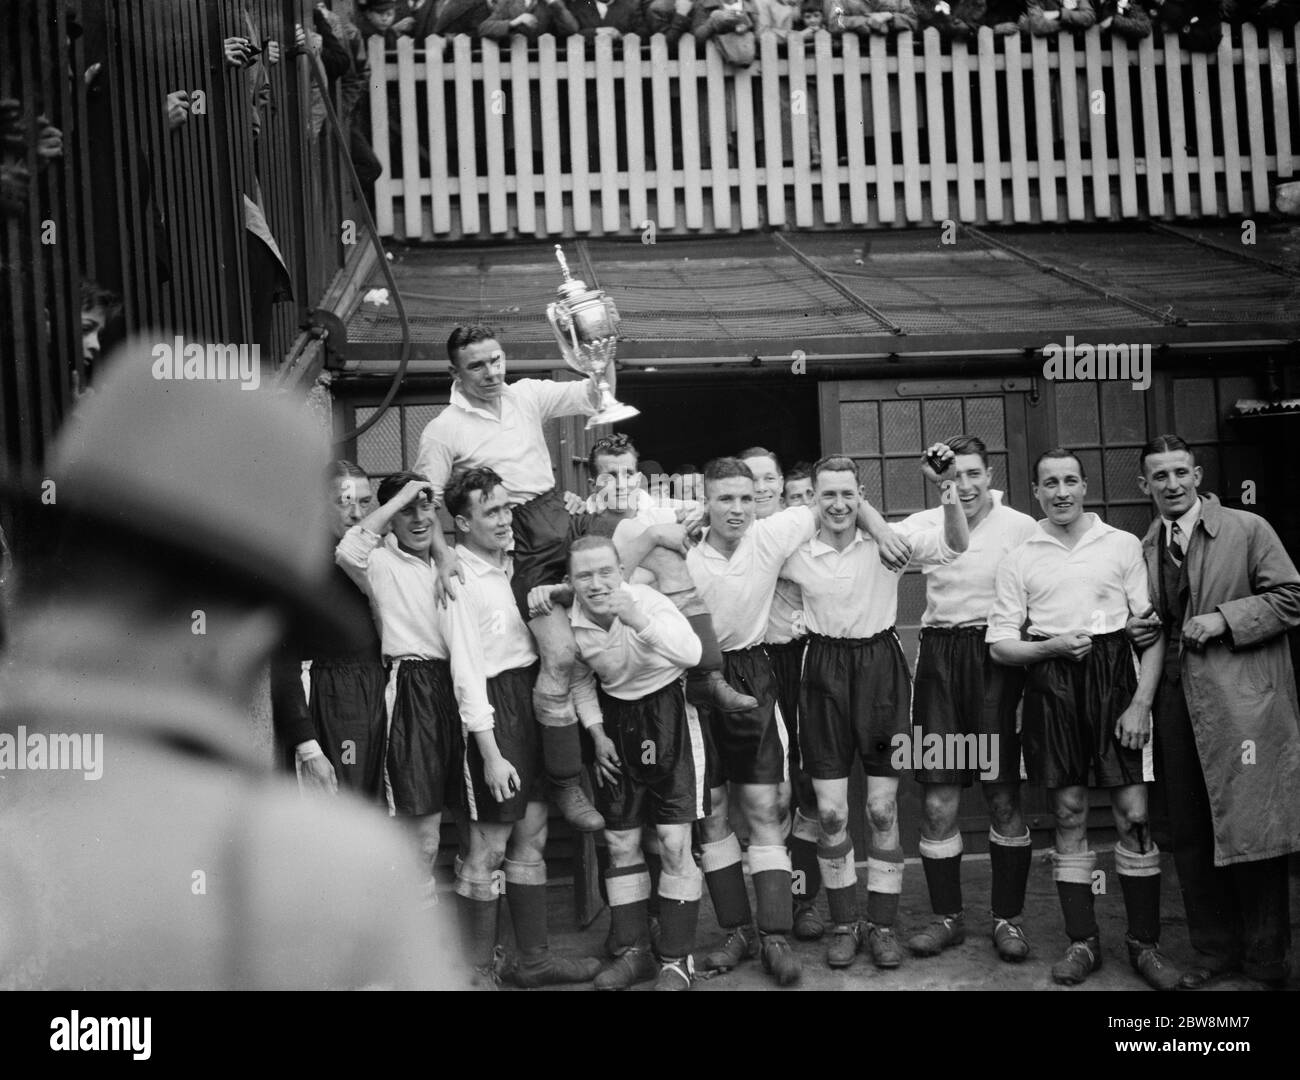 Bromley football club versus Belvedere football club in the FA Amateur Cup Final at Millwall football club stadium the The Den in South Bermondsey, London . Bromley the winning team hold the cup aloft . 1938 Stock Photo